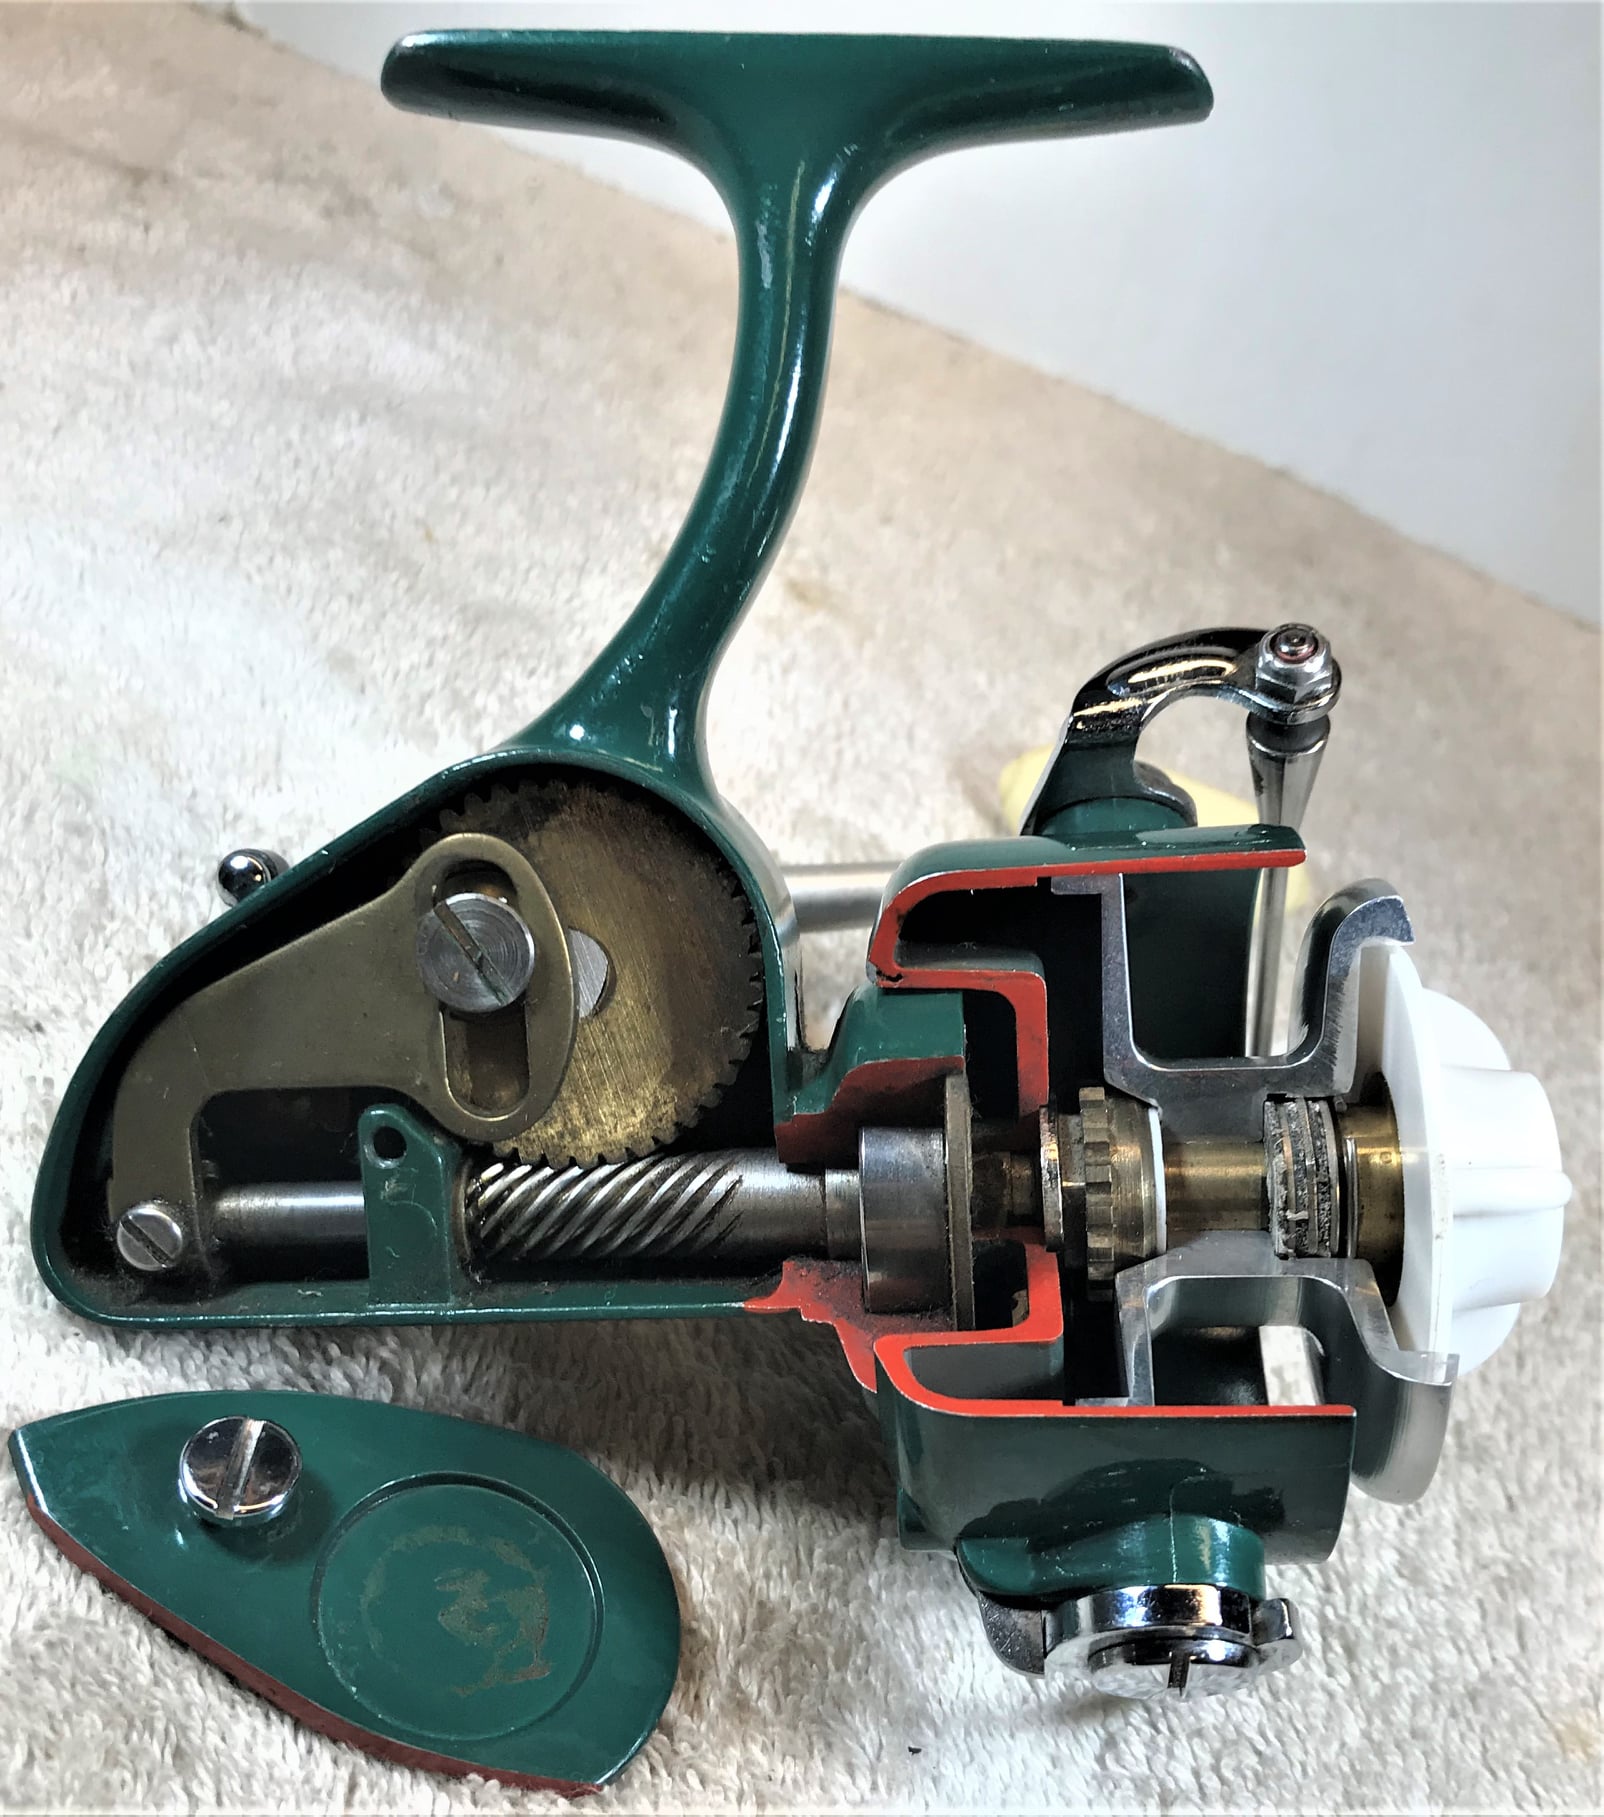 penn International 30 and 50 for sale-price lowered! - Reel Talk - ORCA